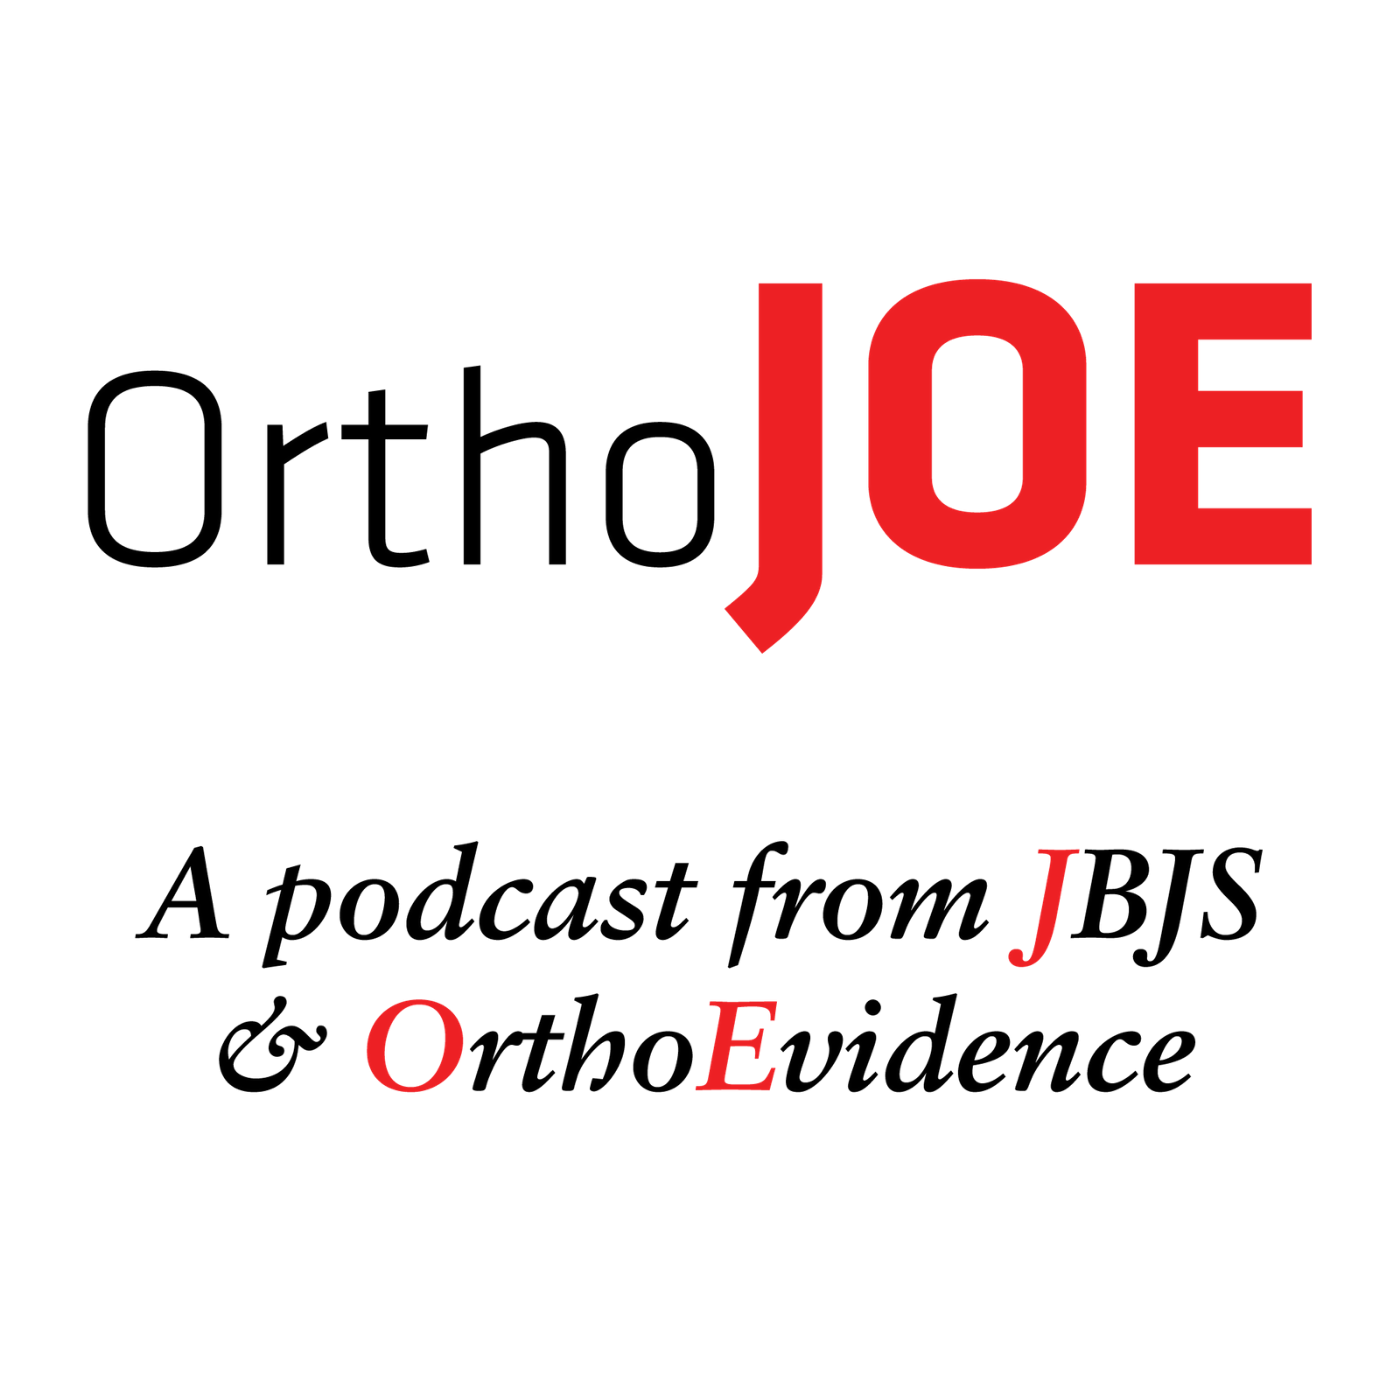 JBJS Essential Surgical Techniques: Celebrating 10 Years of Innovation (with special guest Ed Cheng)